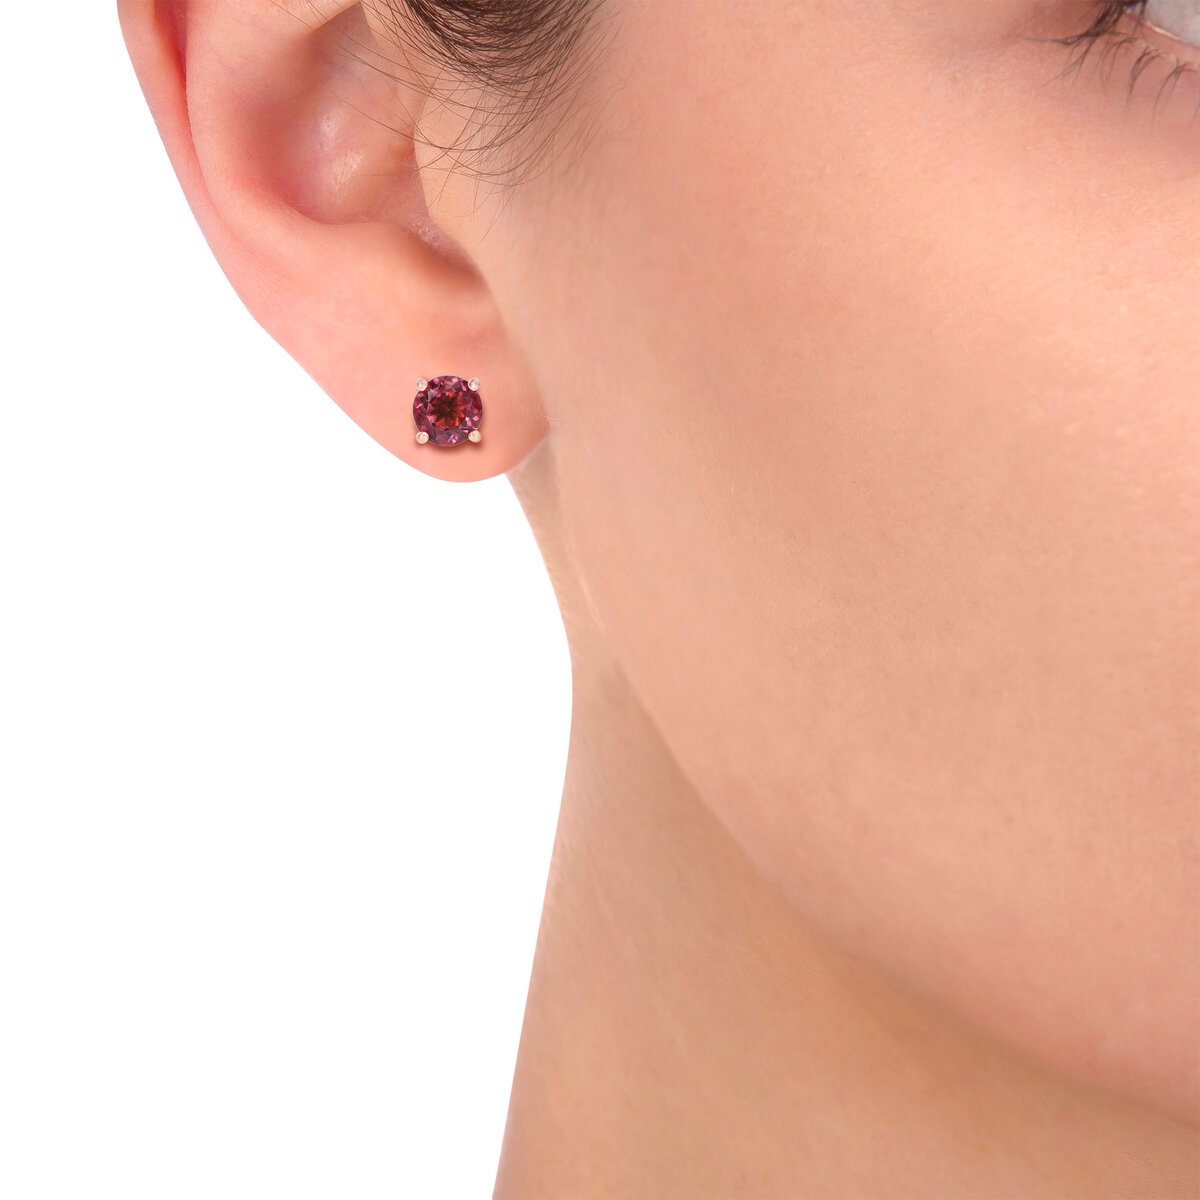 Round Cut Pink Tourmaline Stud Earrings, 14ct Rose Gold